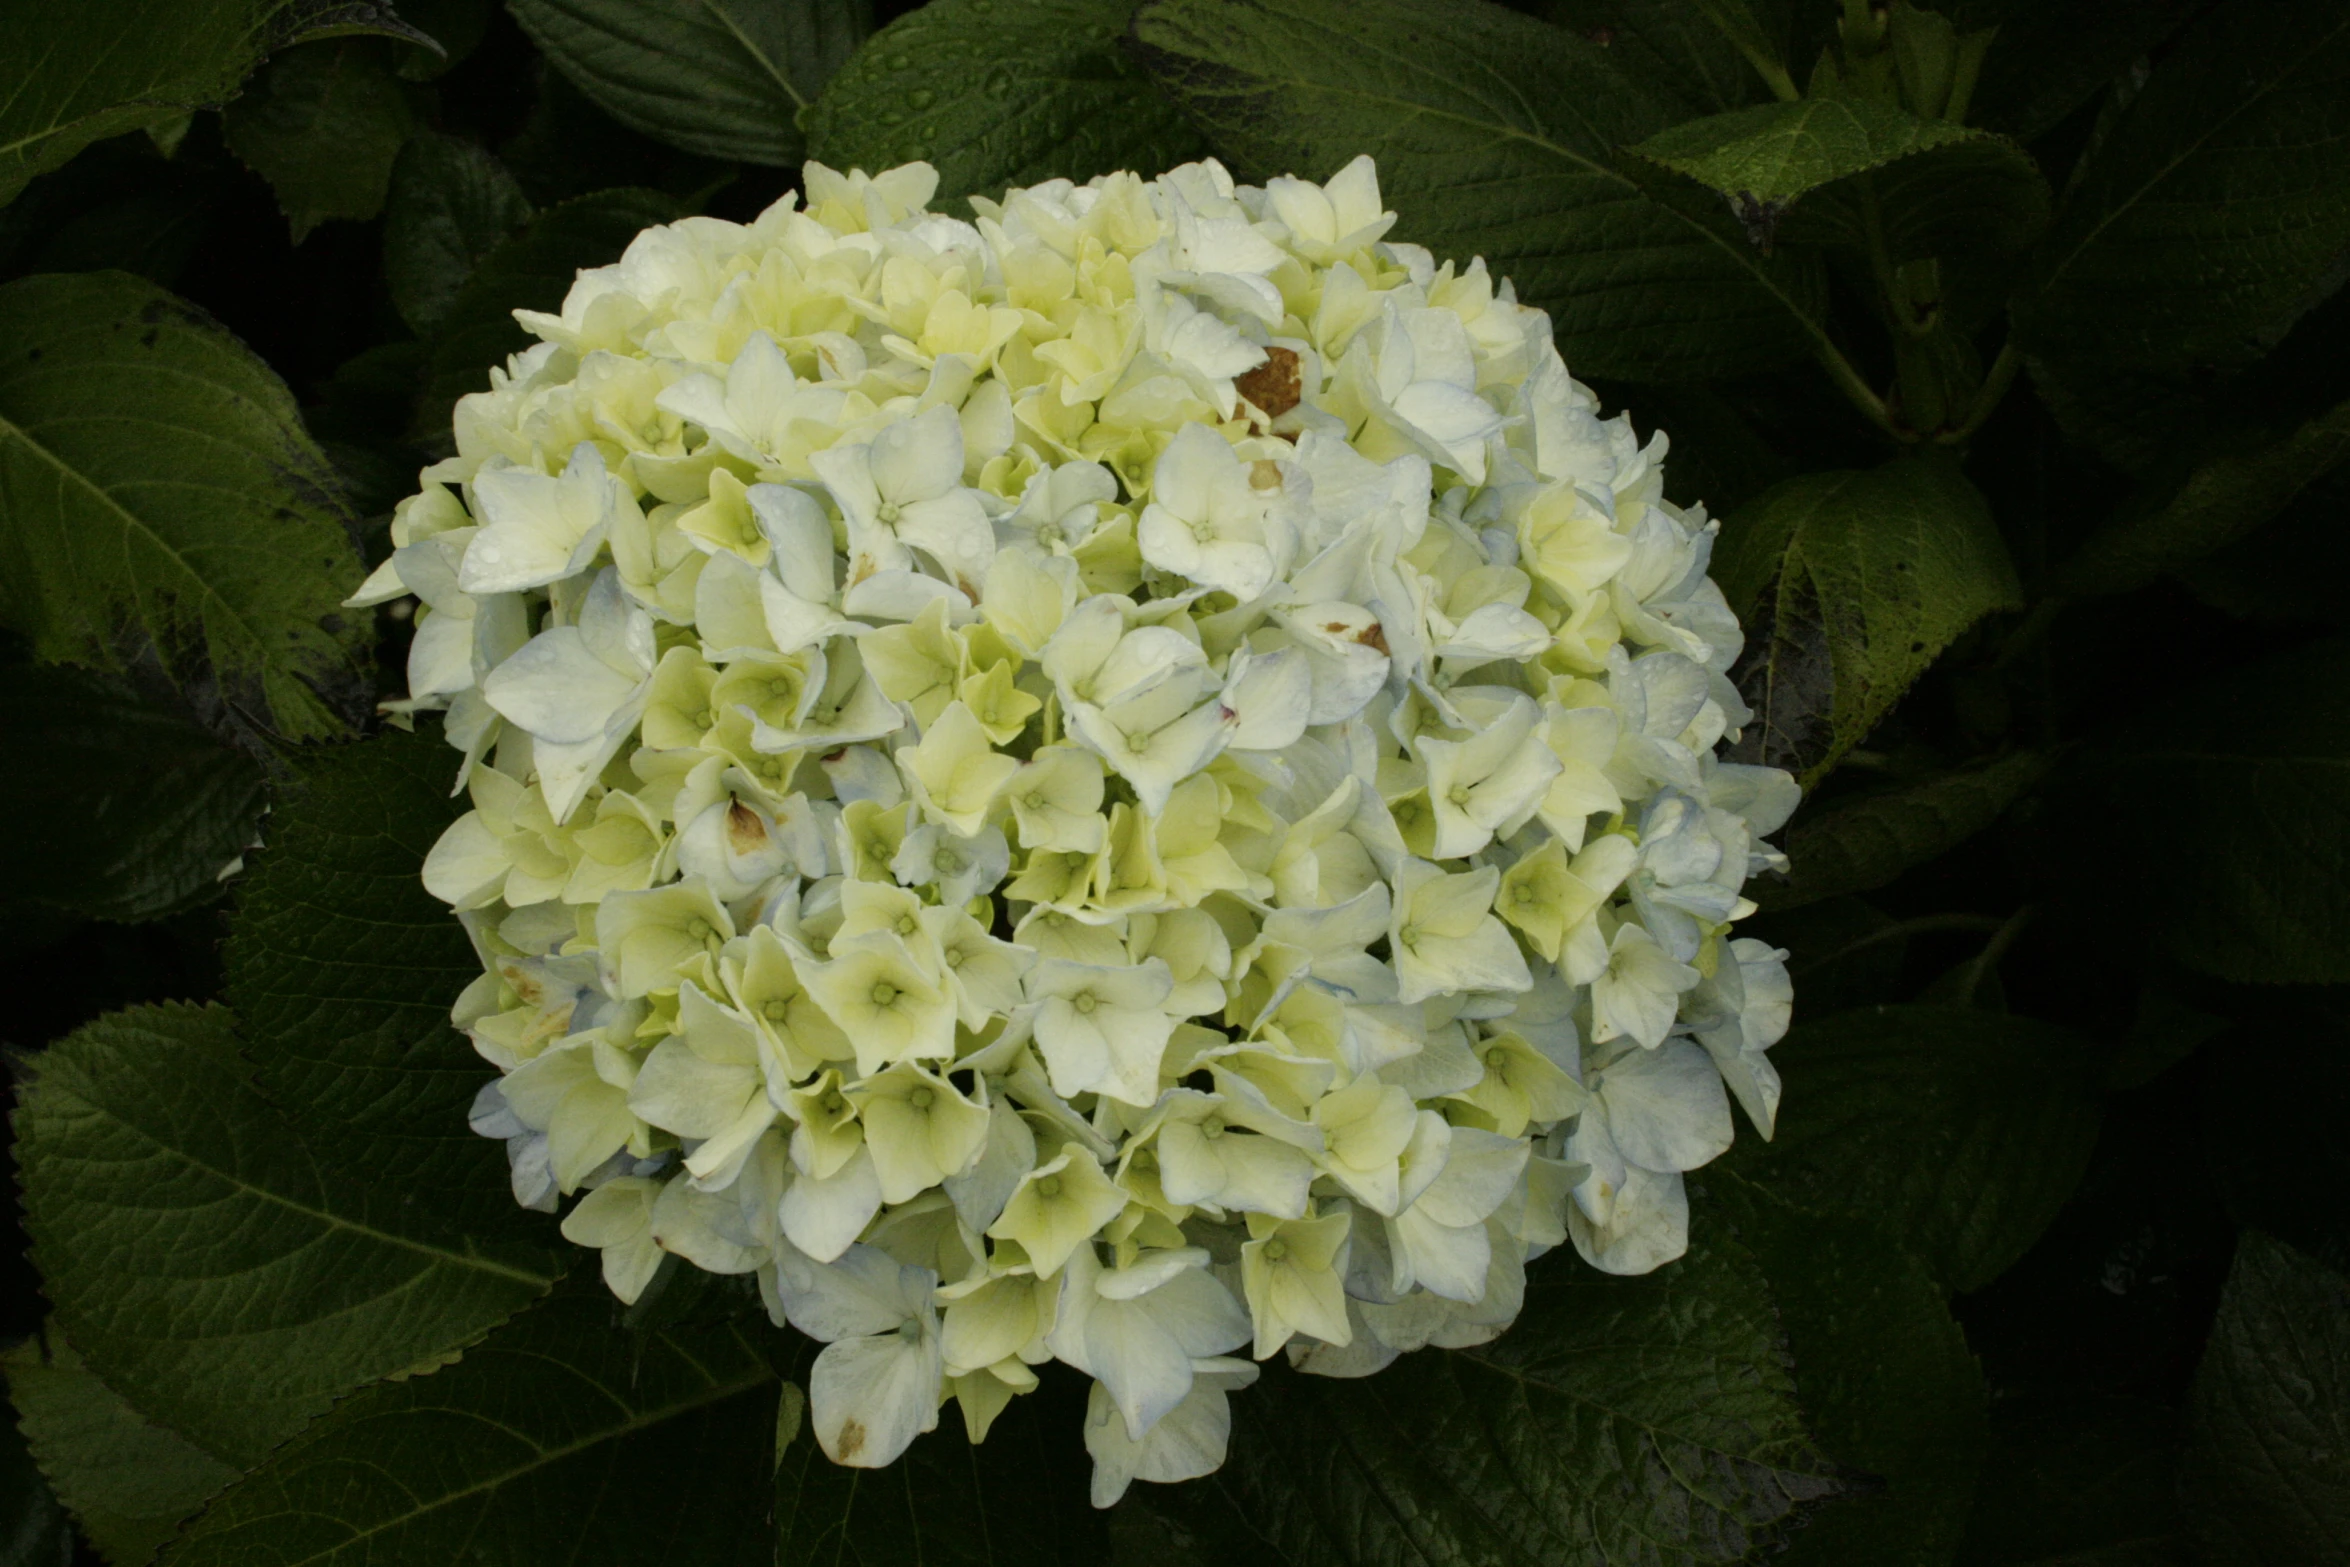 a large white flower surrounded by lots of green leaves